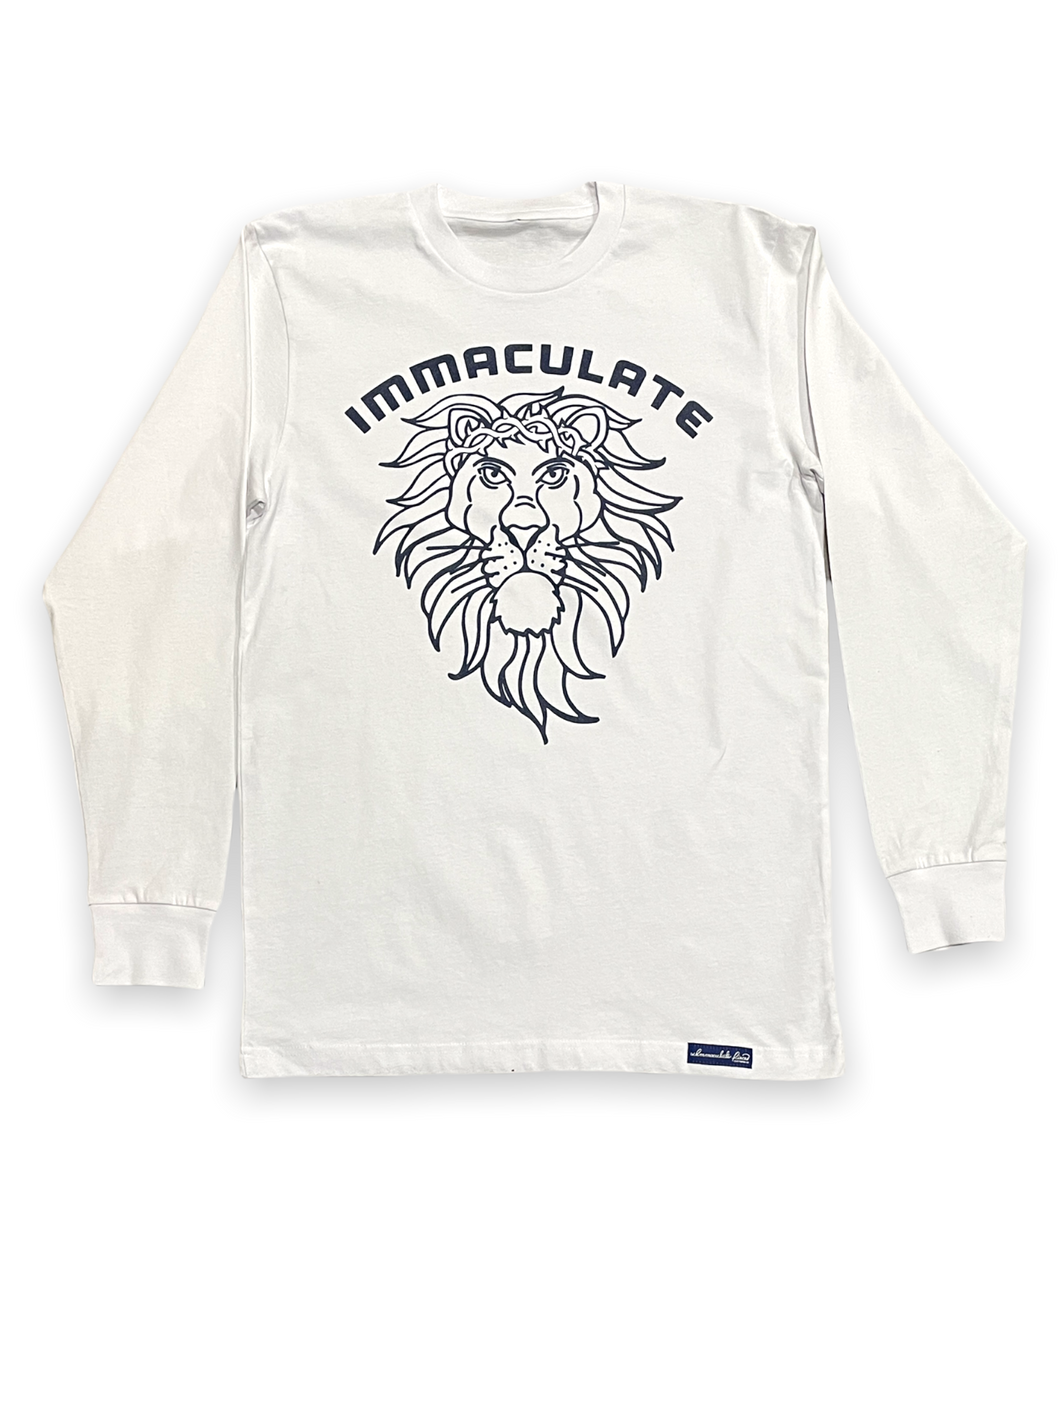 Classic King of Kings Long Sleeve White